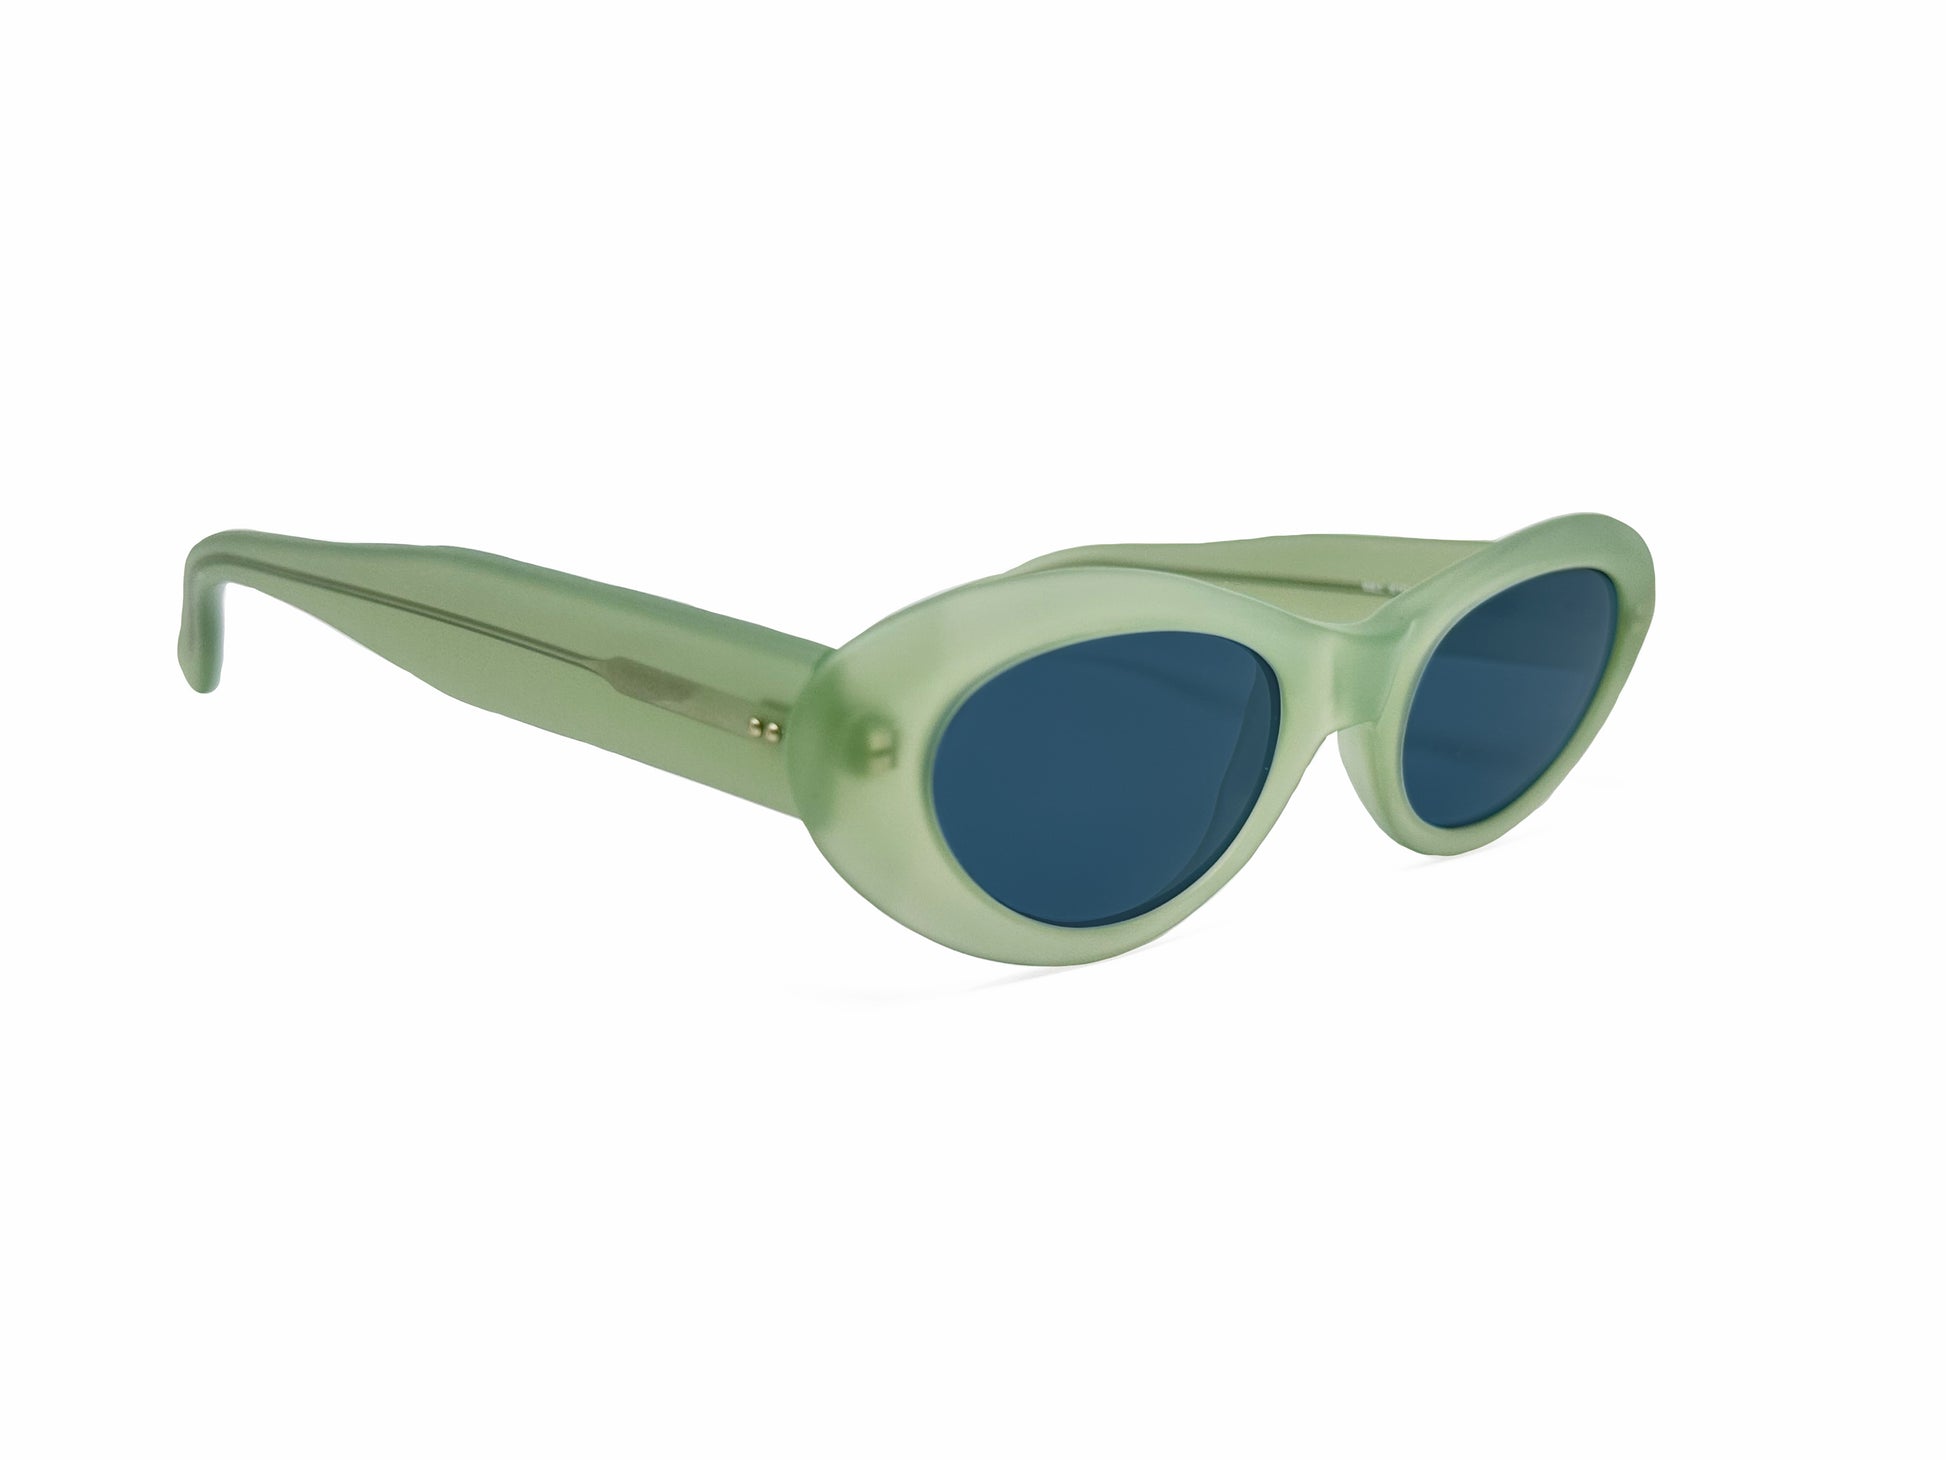 Kador oval, cat-eye, acetate sunglasses. Model: 3. Color: 1653 - Mint with blue lenses. Side view.